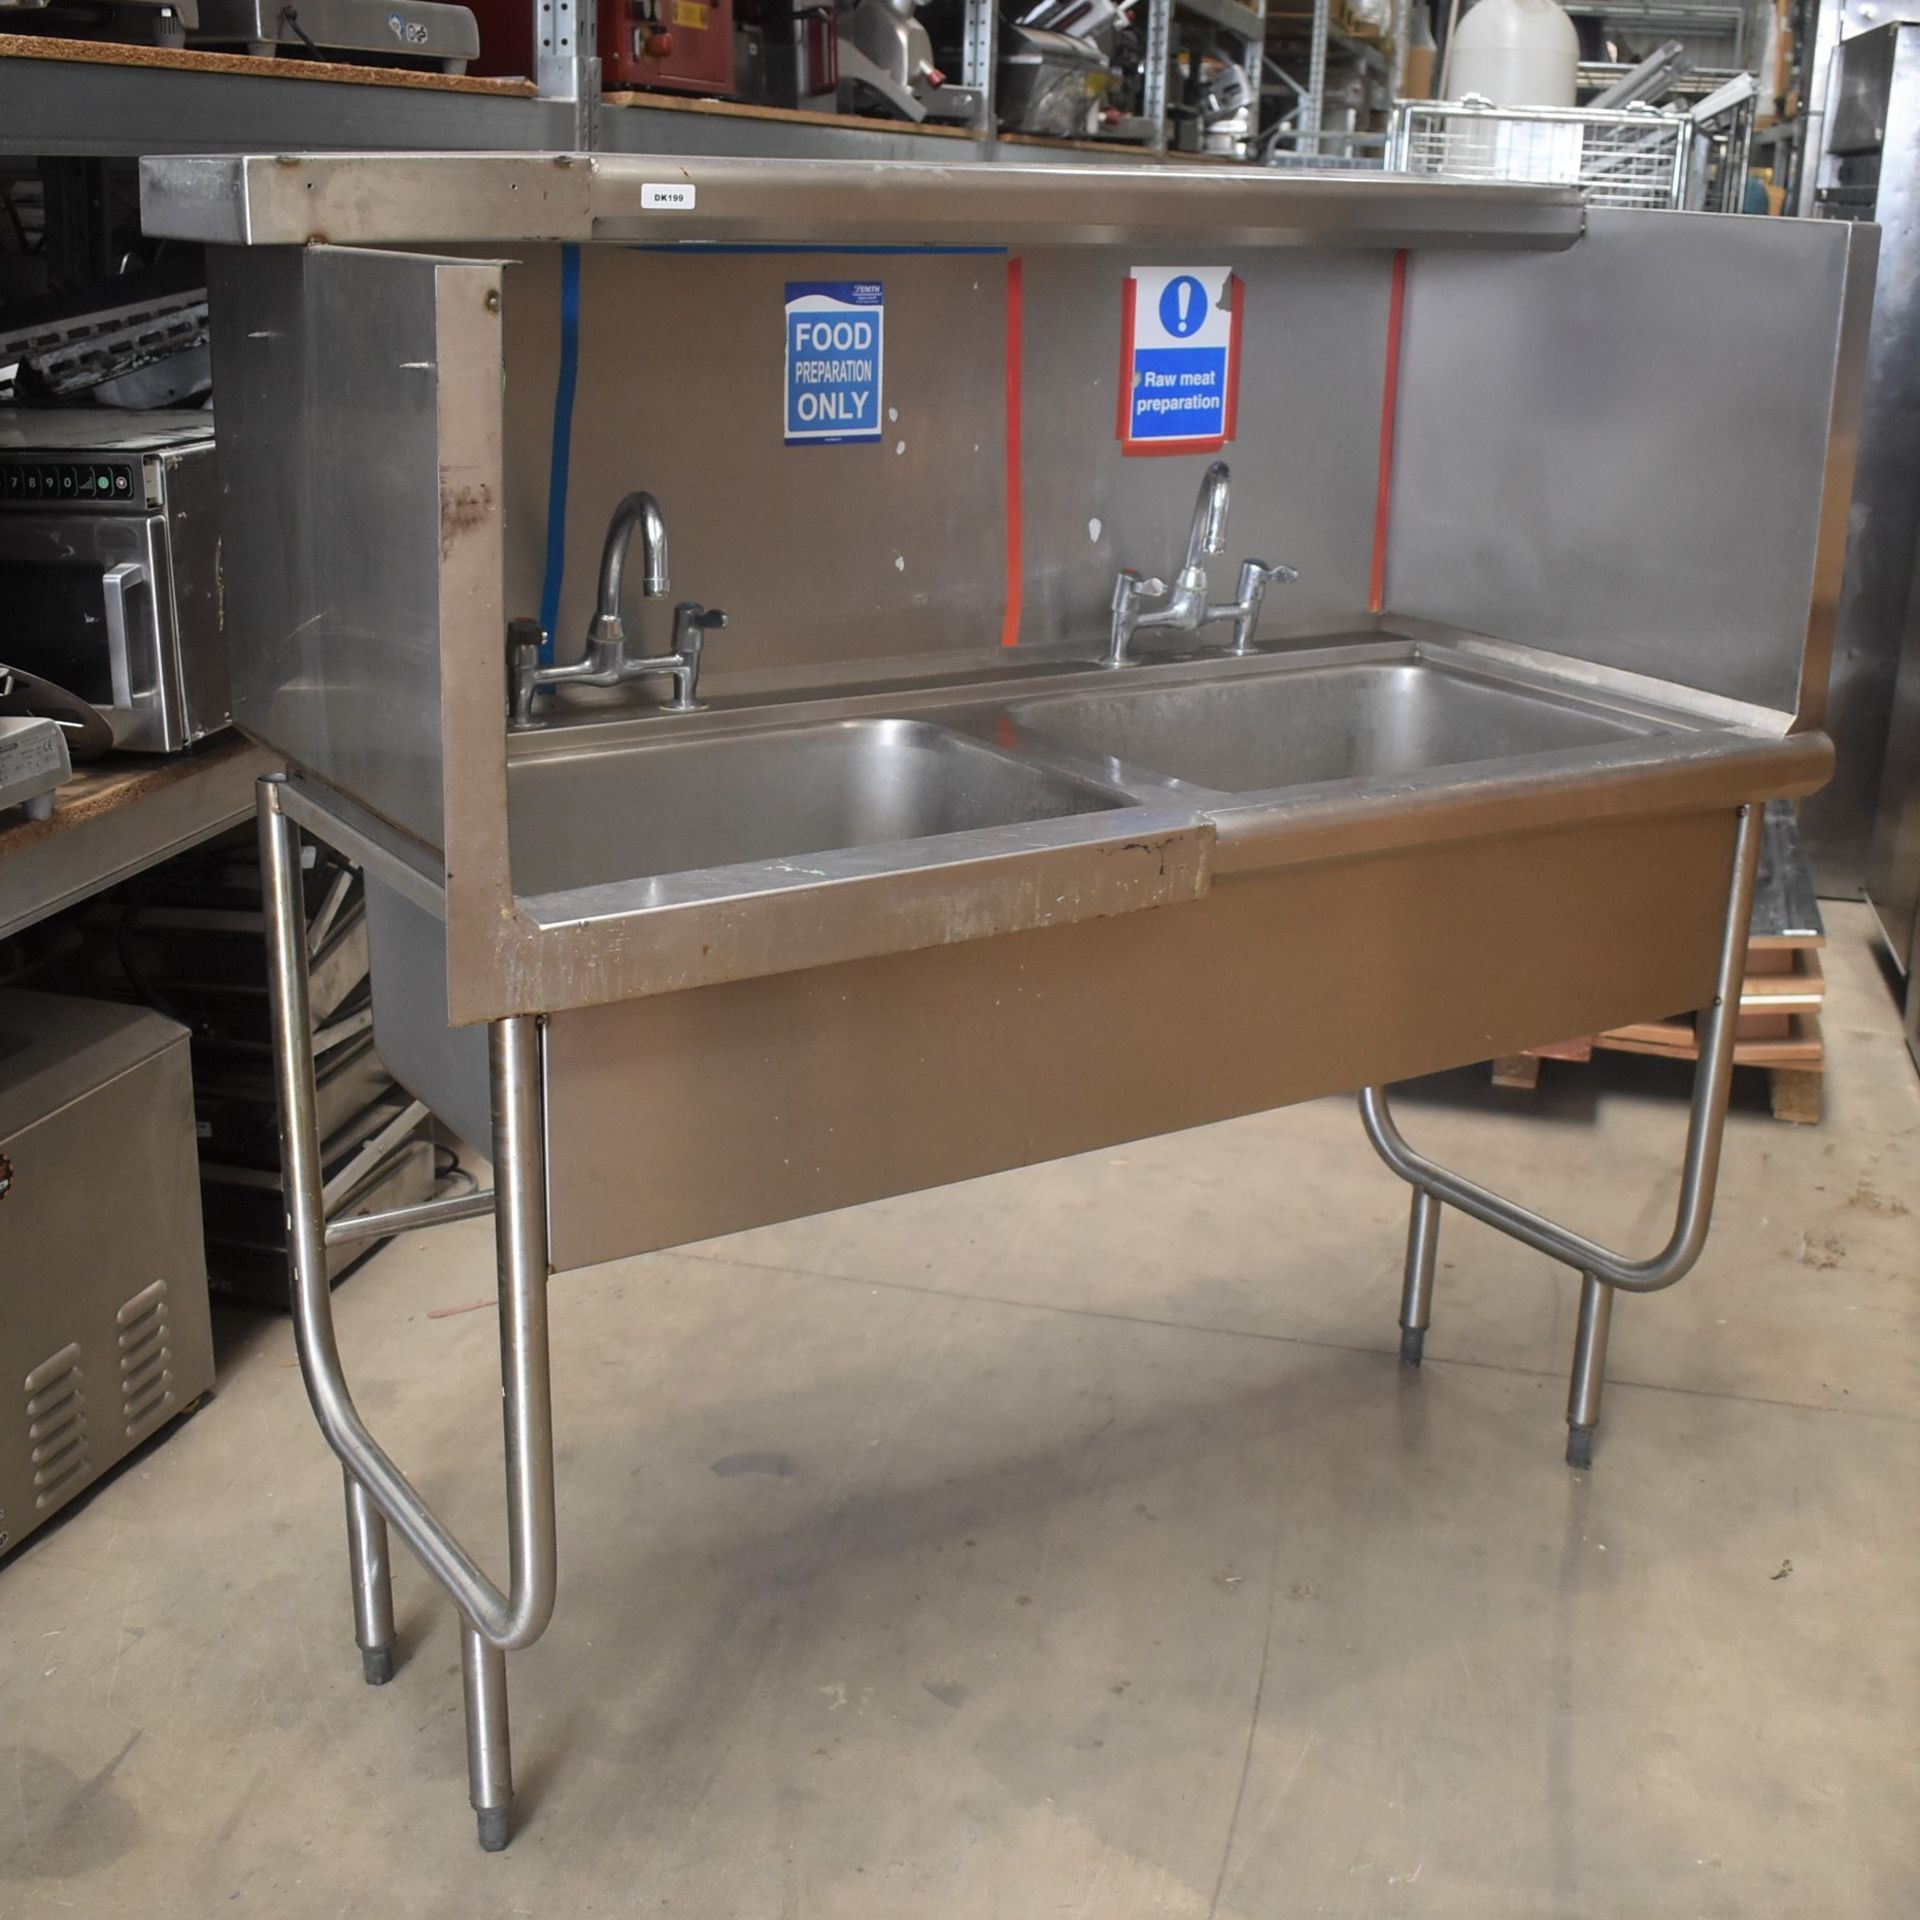 1 x Stainless Steel Twin Sink Wash Unit With Mixer Taps and Splash Back Surround - Width: 125 cms - Image 7 of 11